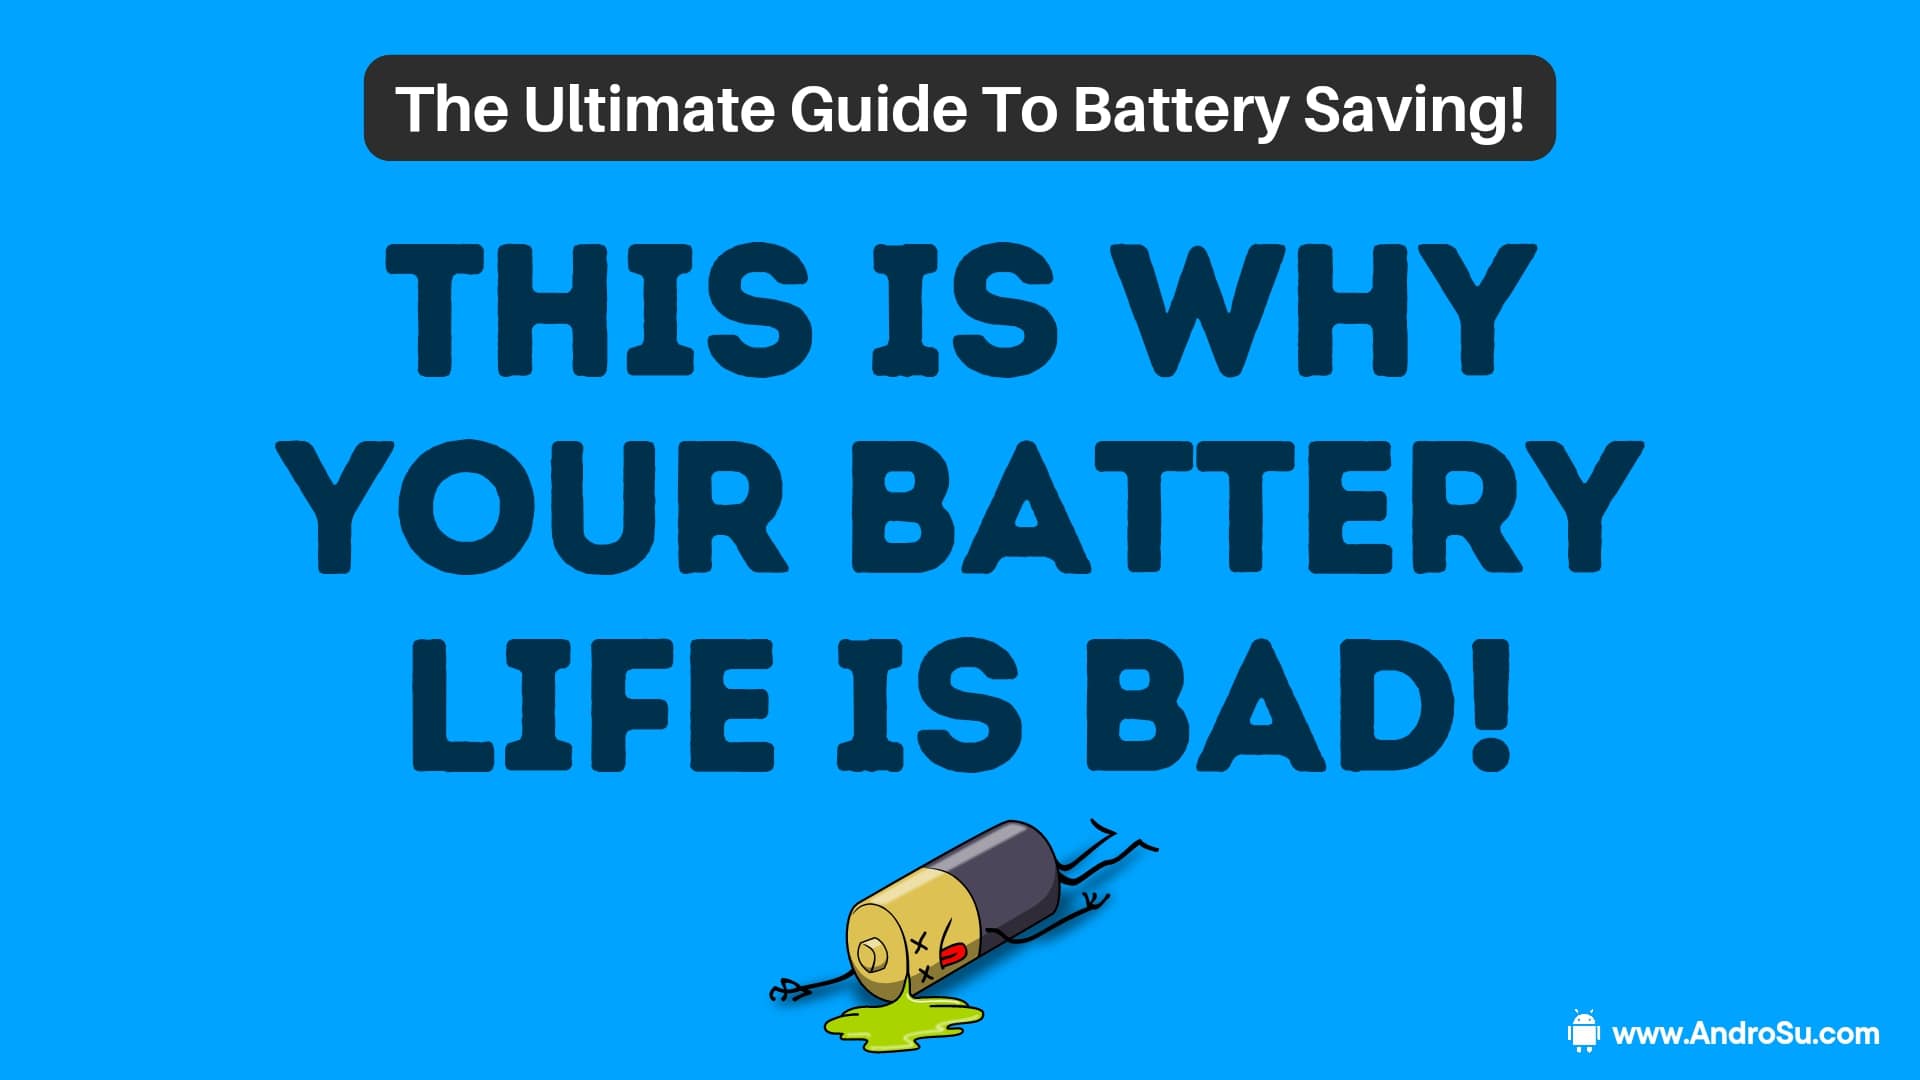 Save Phone Battery Life, How to Save Phone Battery Life, Save Battery Life